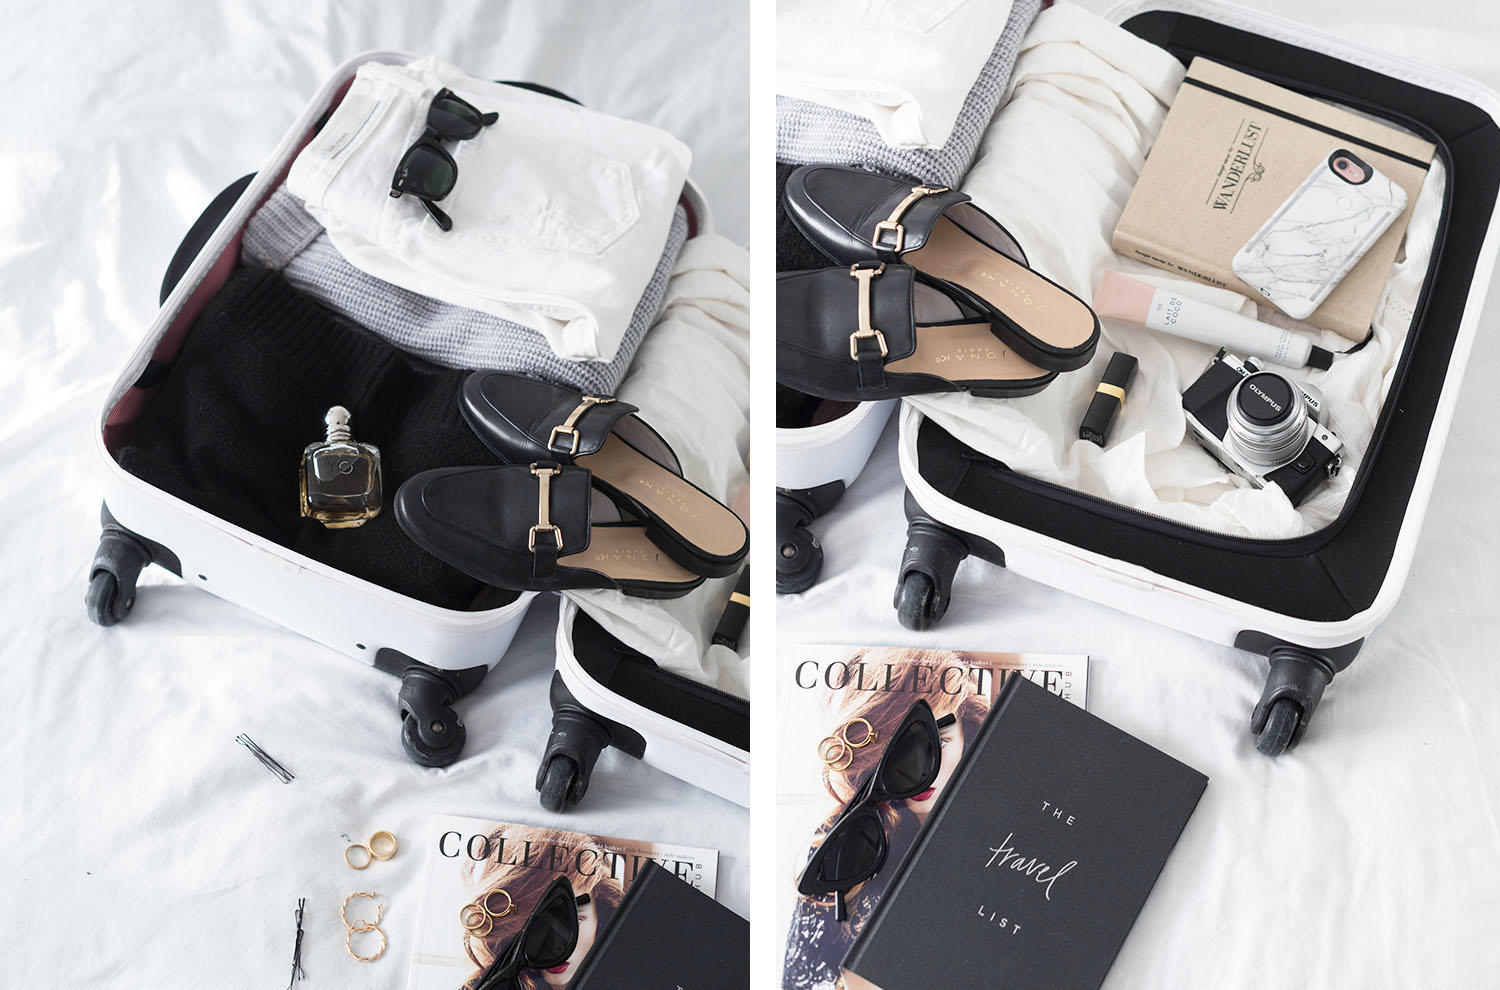 A selection of items for a trip to Washington, DC, including Armani perfume, Chanel lipstick and Grlfrnd white jeans, packed by Cee Fardoe, the travel blogger behind Coco & Vera